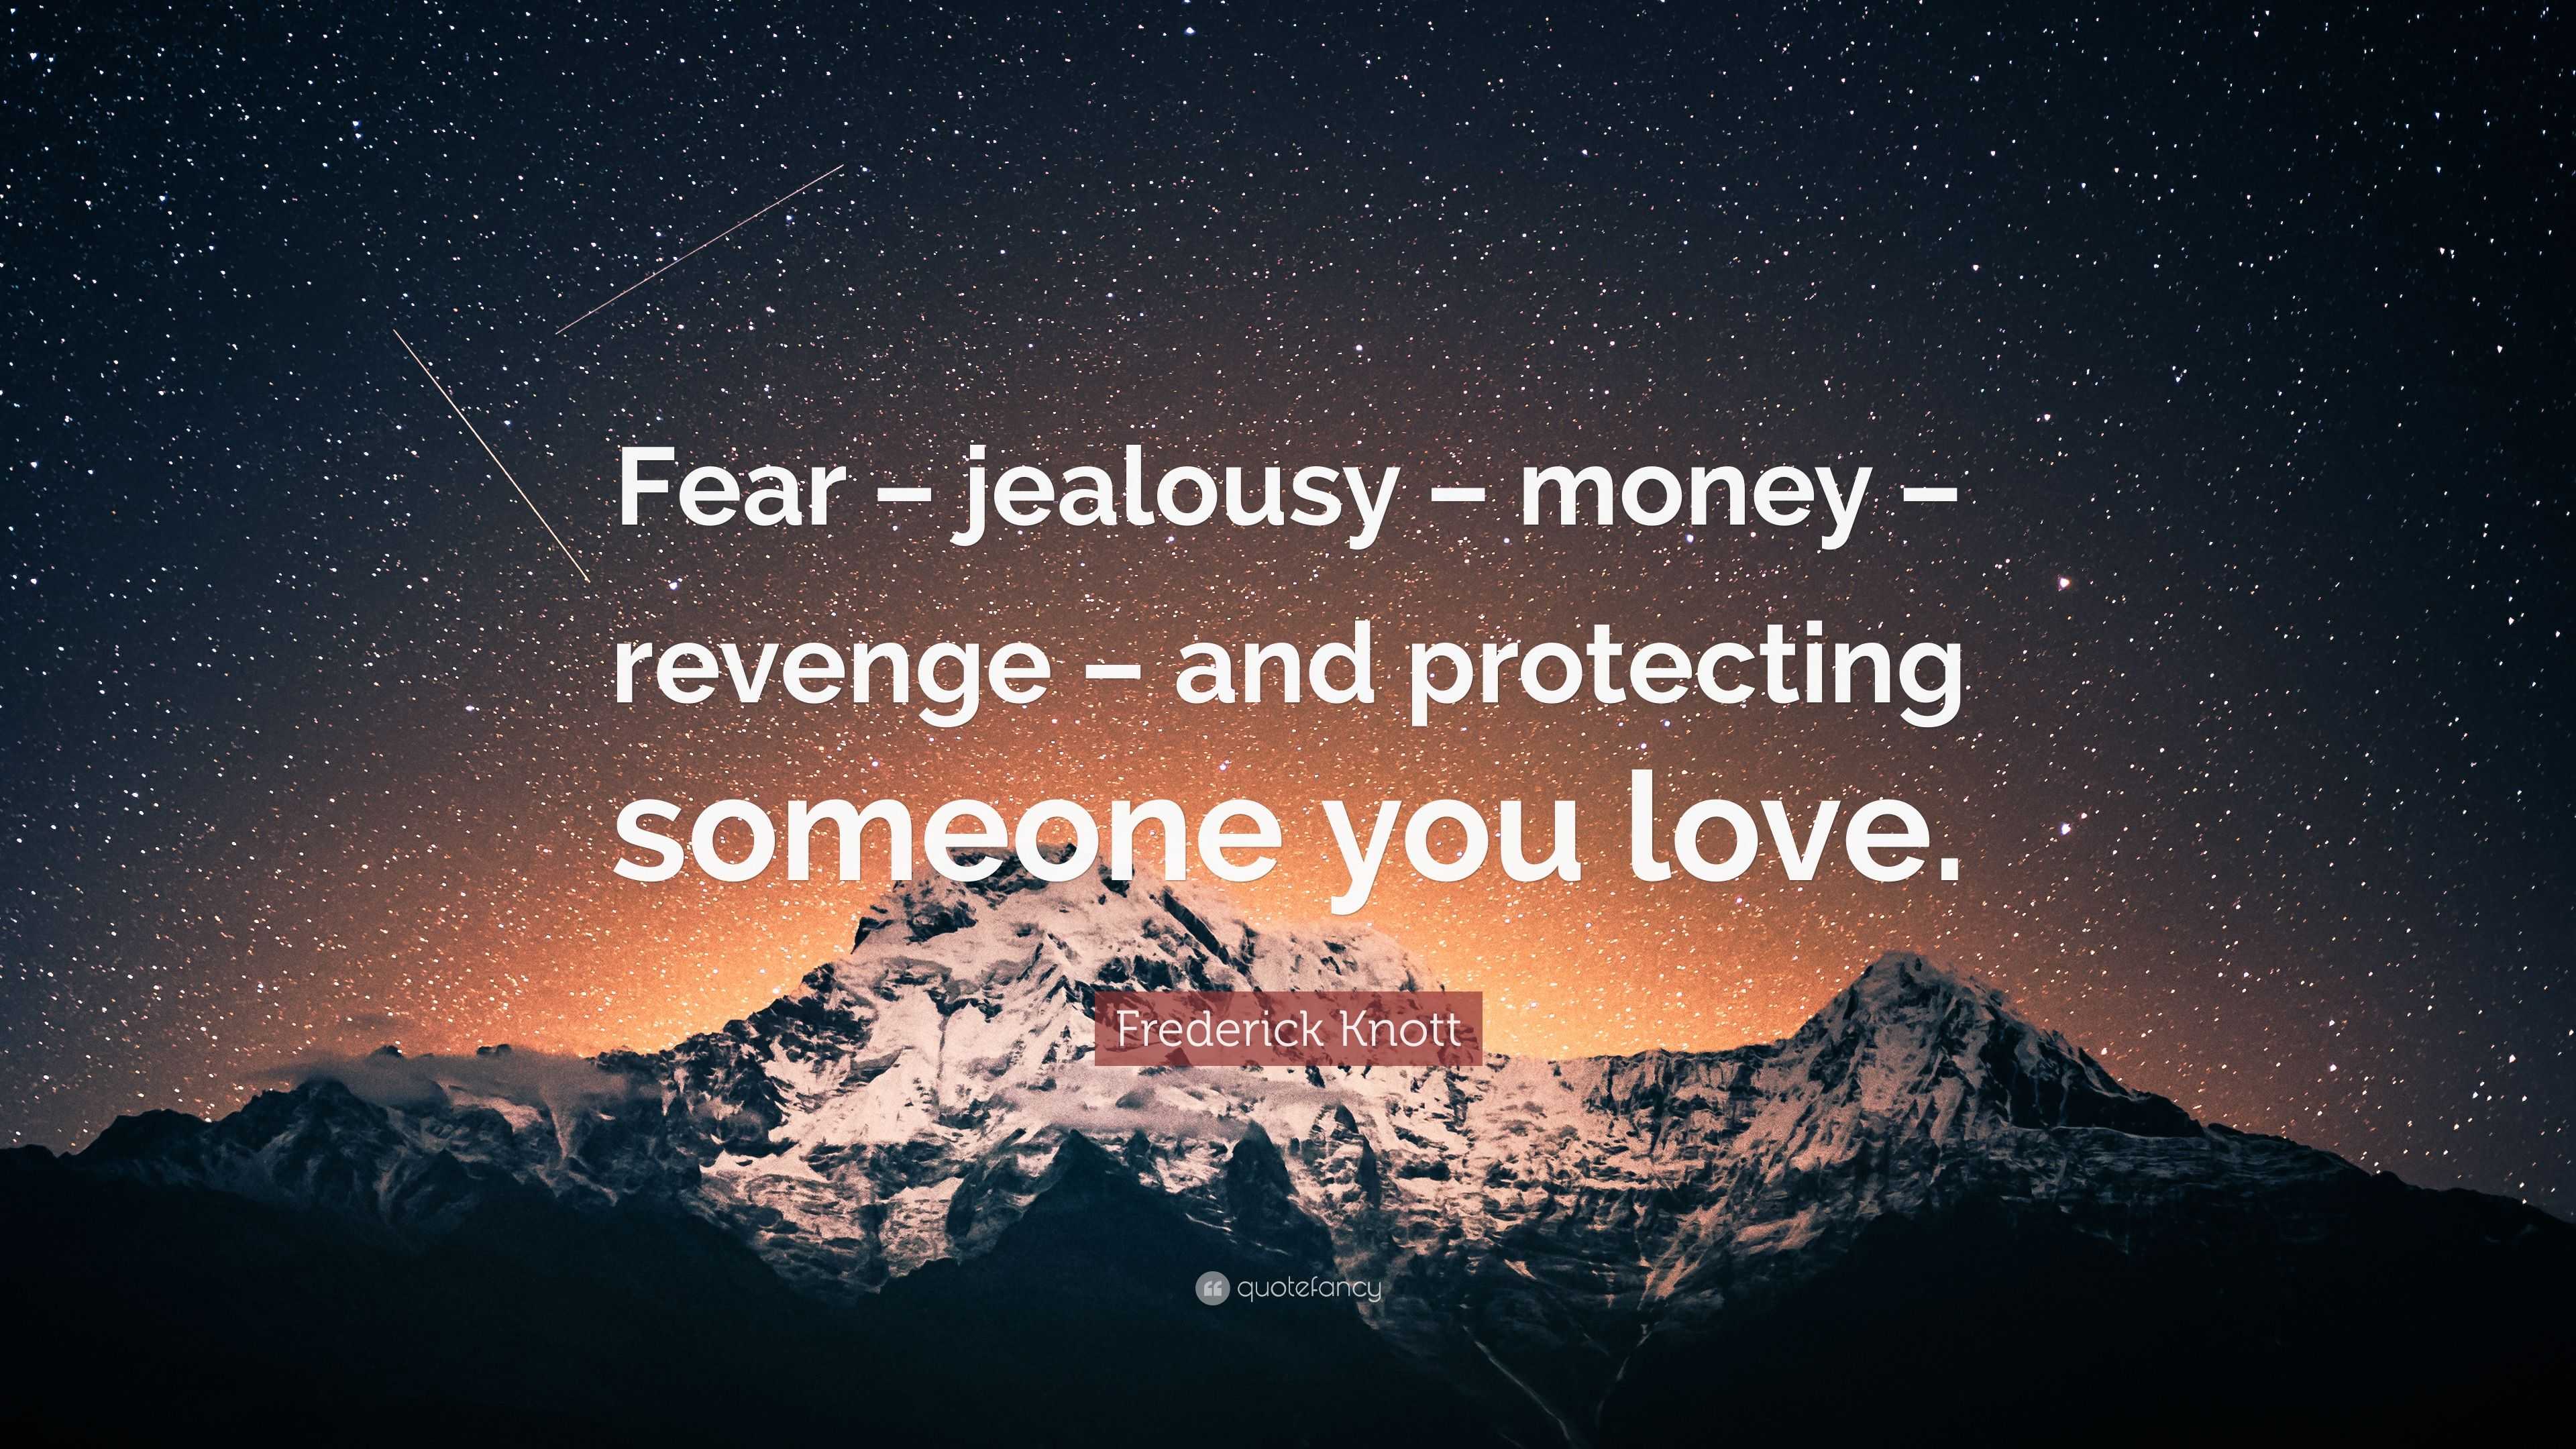 Frederick Knott Quote “Fear – jealousy – money – revenge – and protecting someone